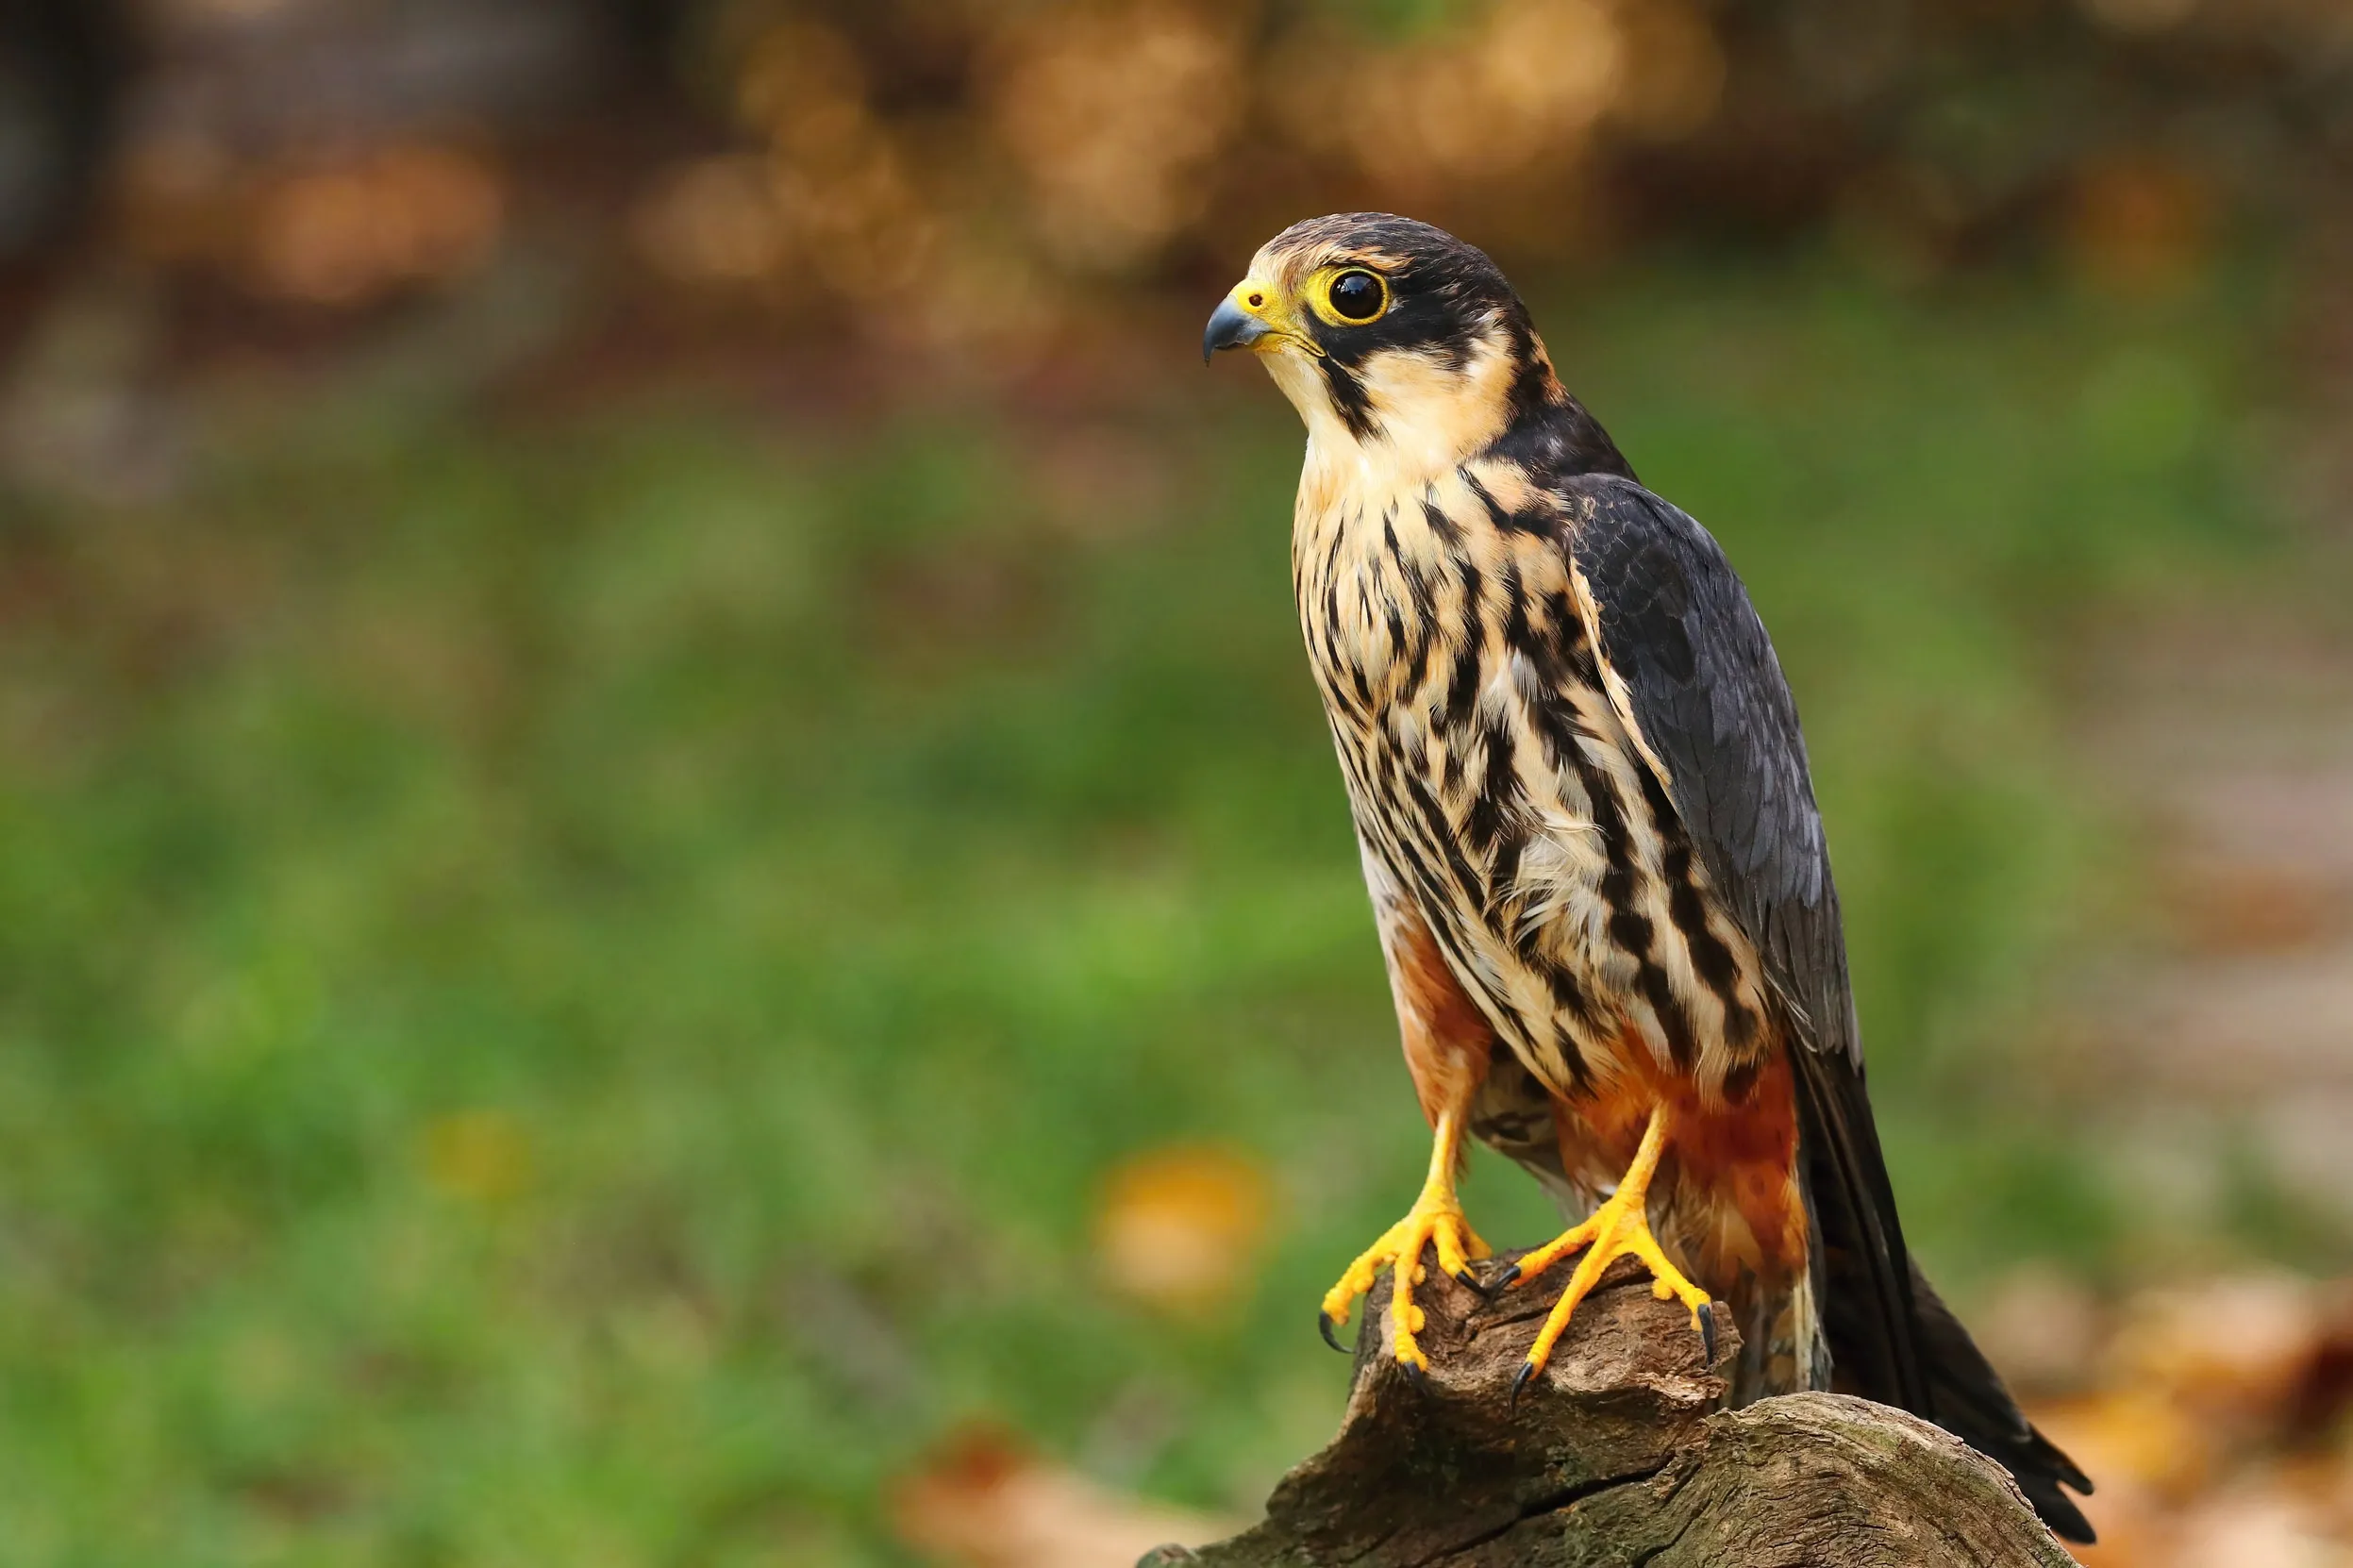 A lone Hobby perched on a log with a woodland background.